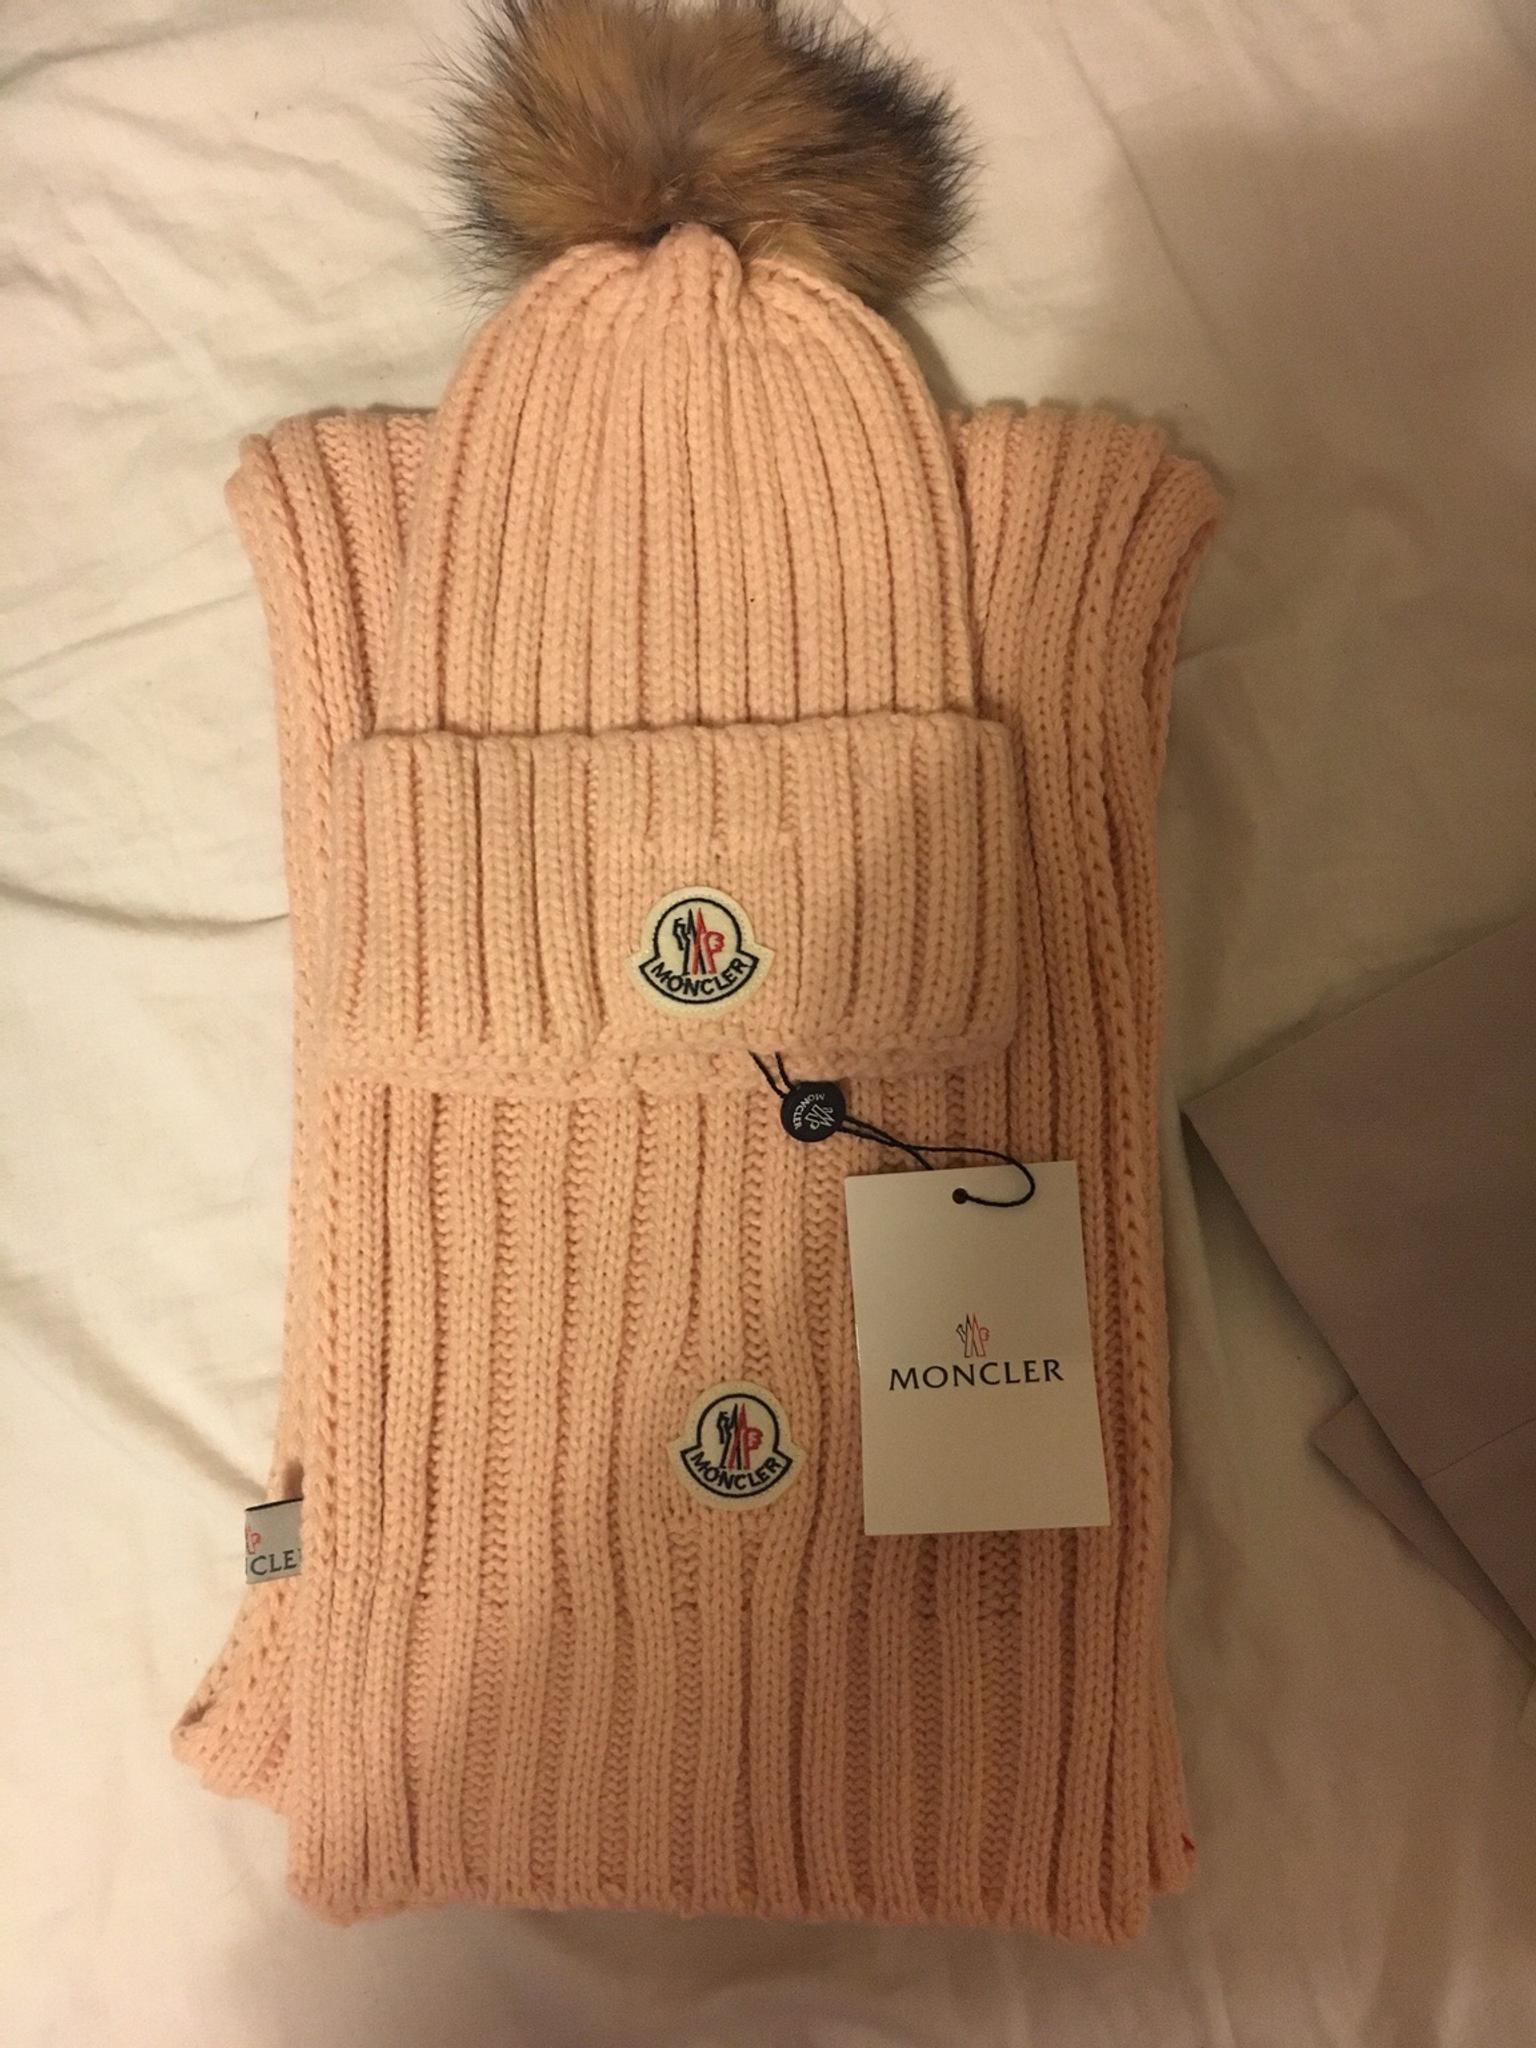 moncler scarf and hat set